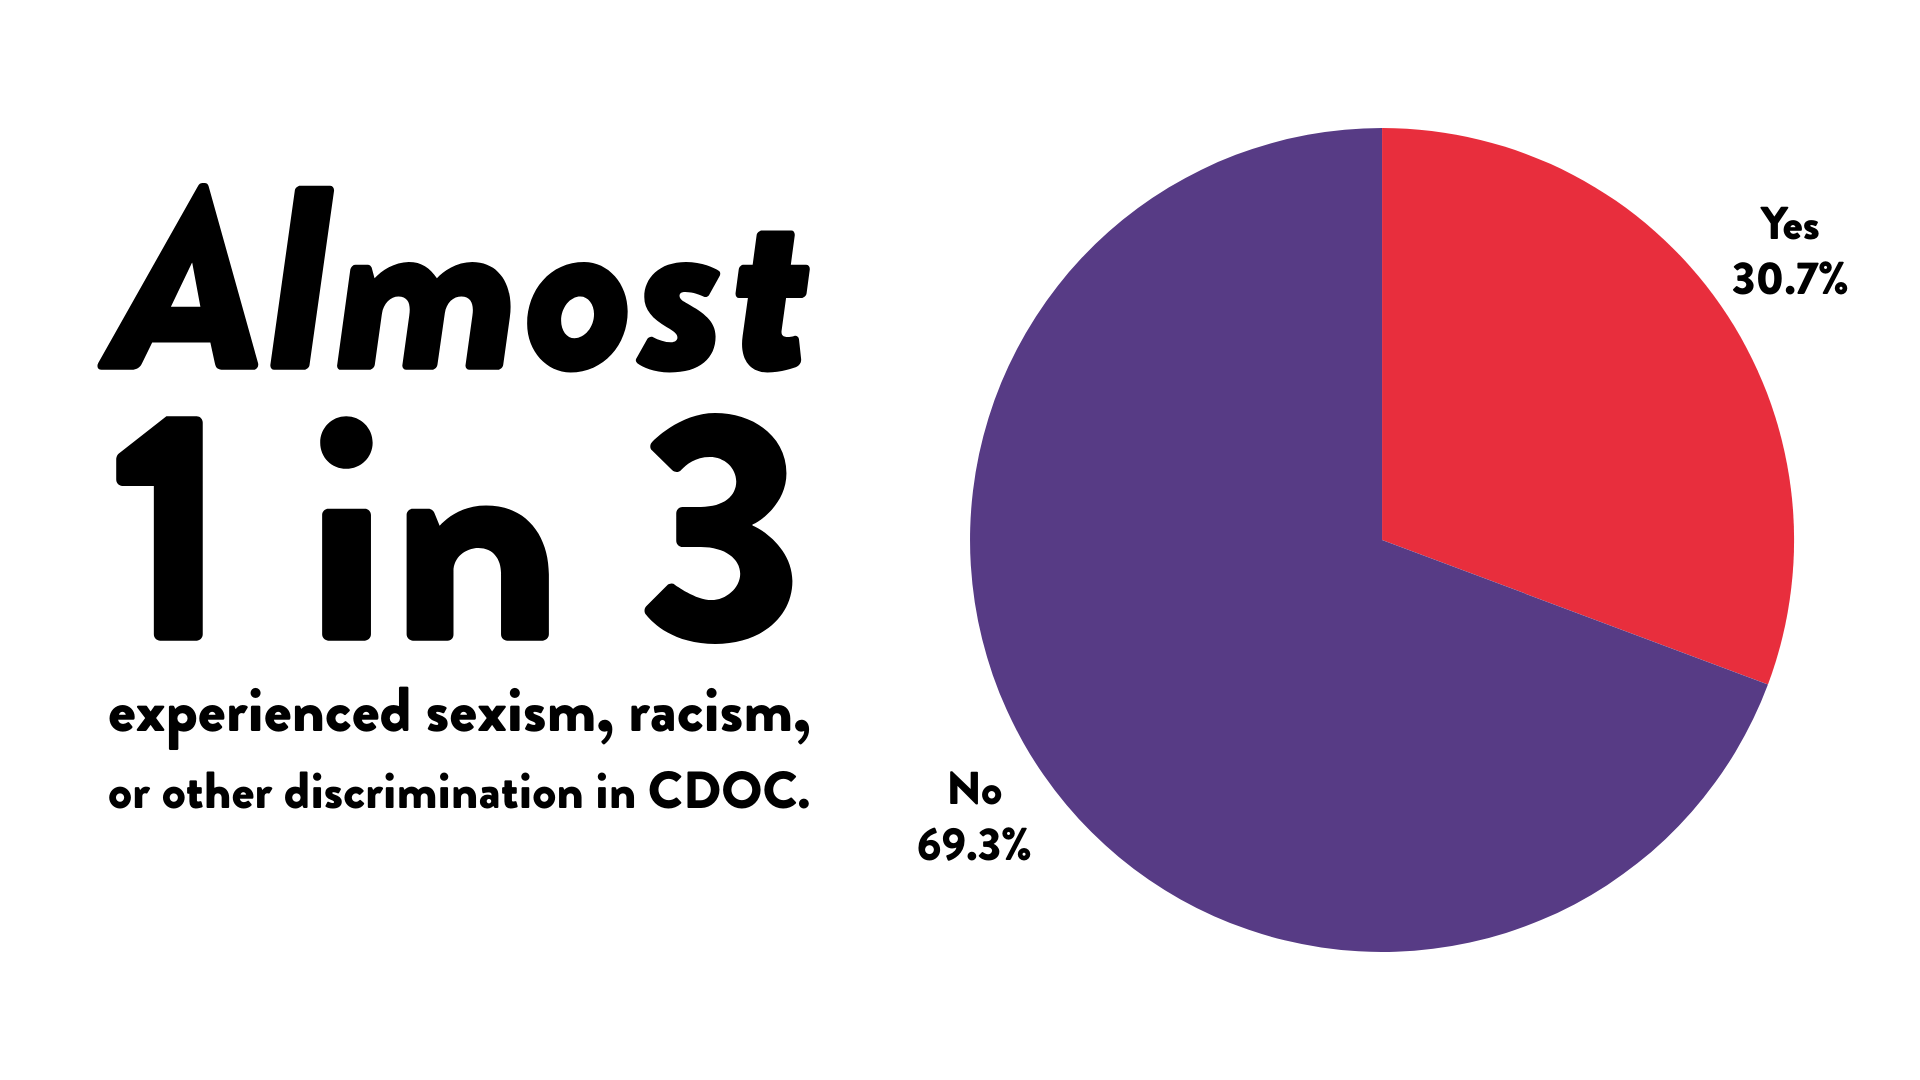 Almost 1 in 3 survey respondents experienced sexism, racism, or other discrimination in CDOC.